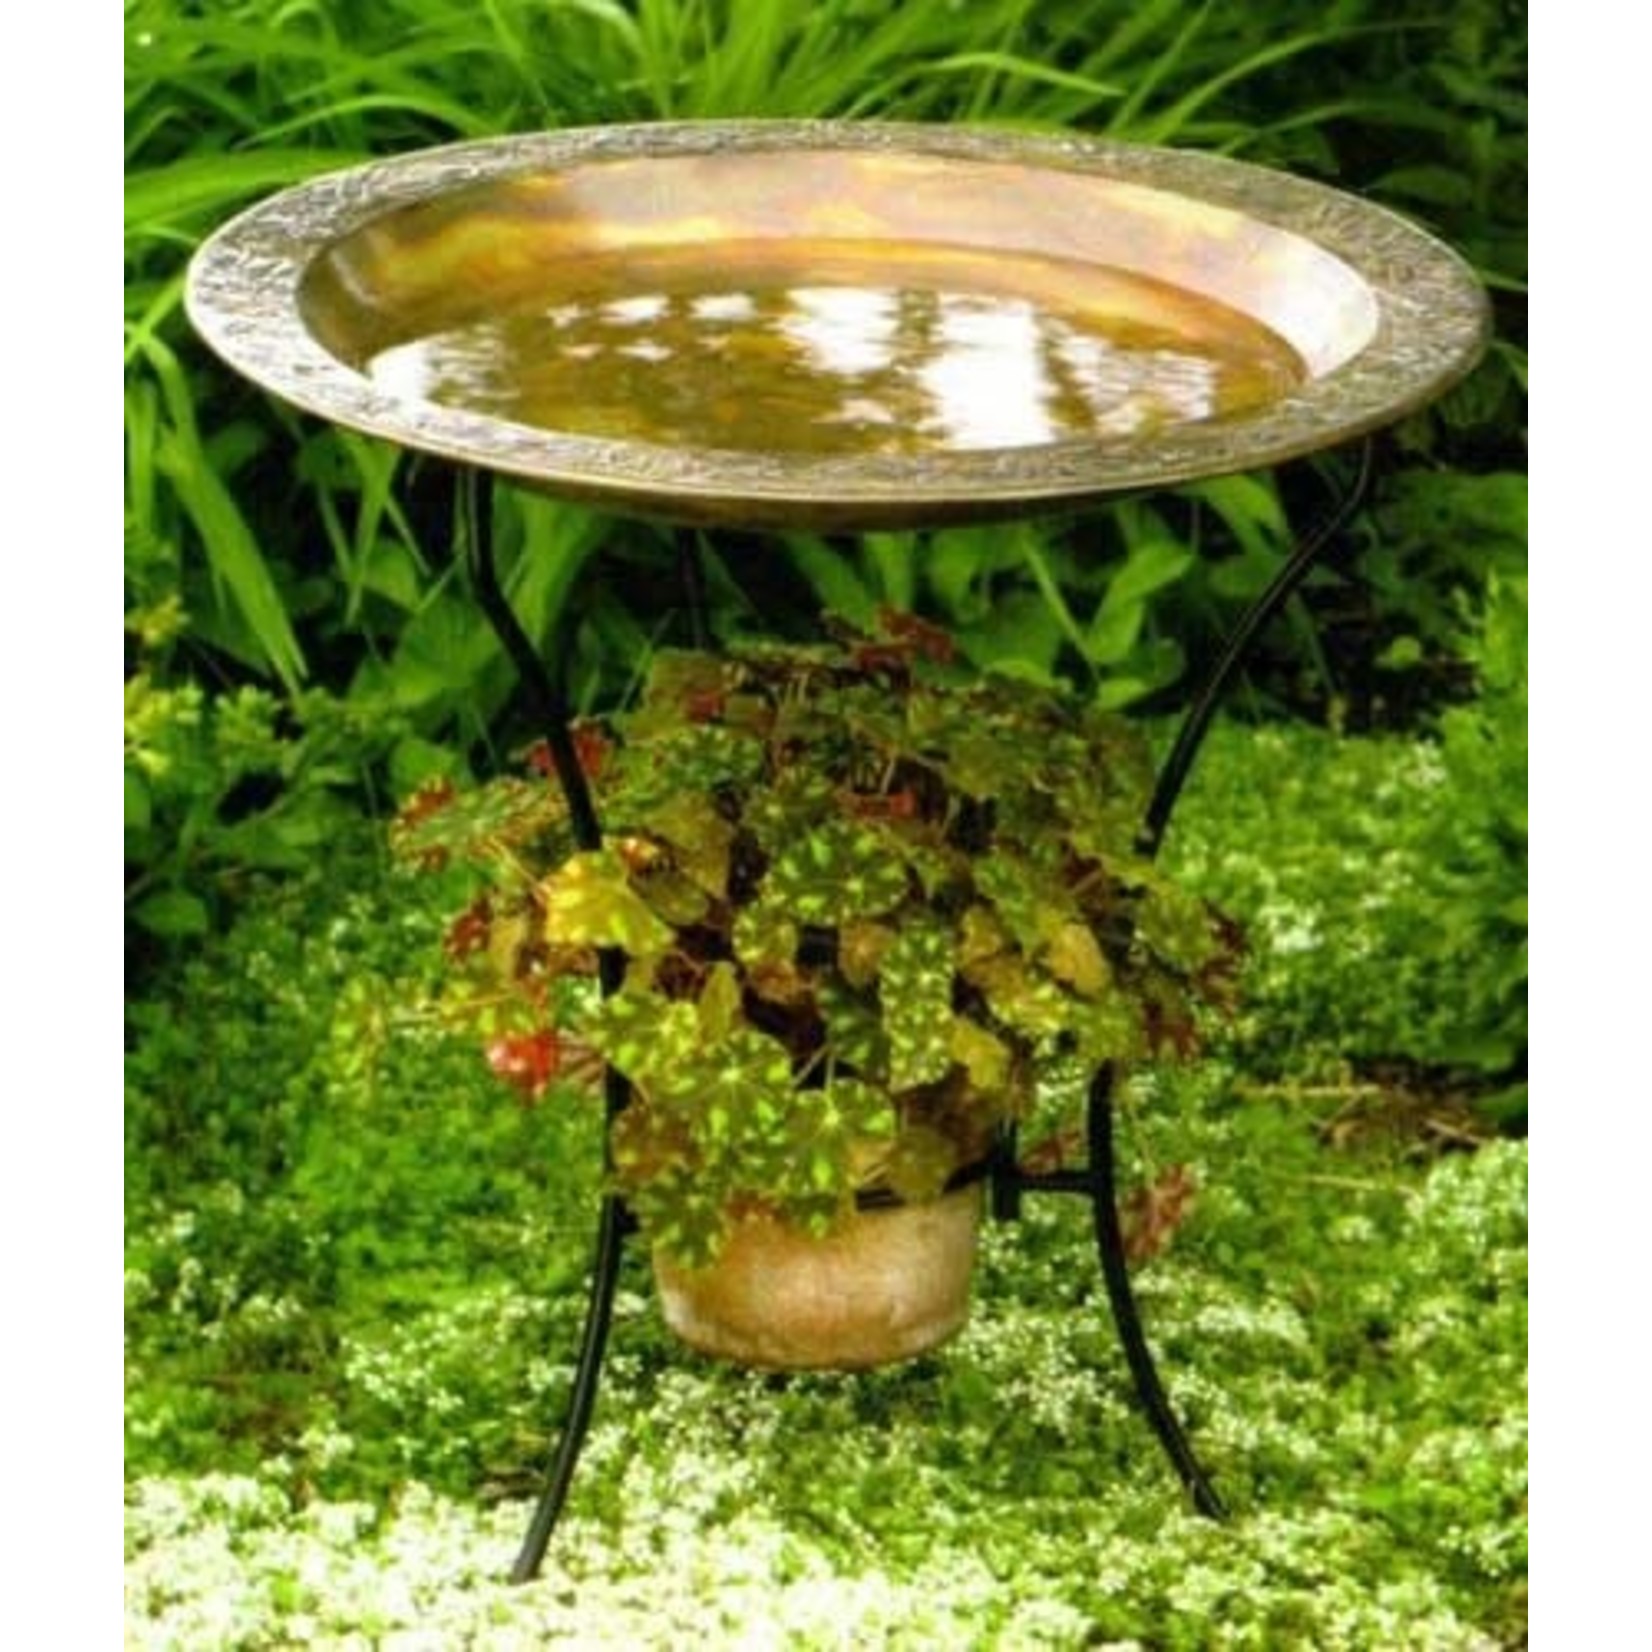 Copperplated Steel Bird Bath with Stand